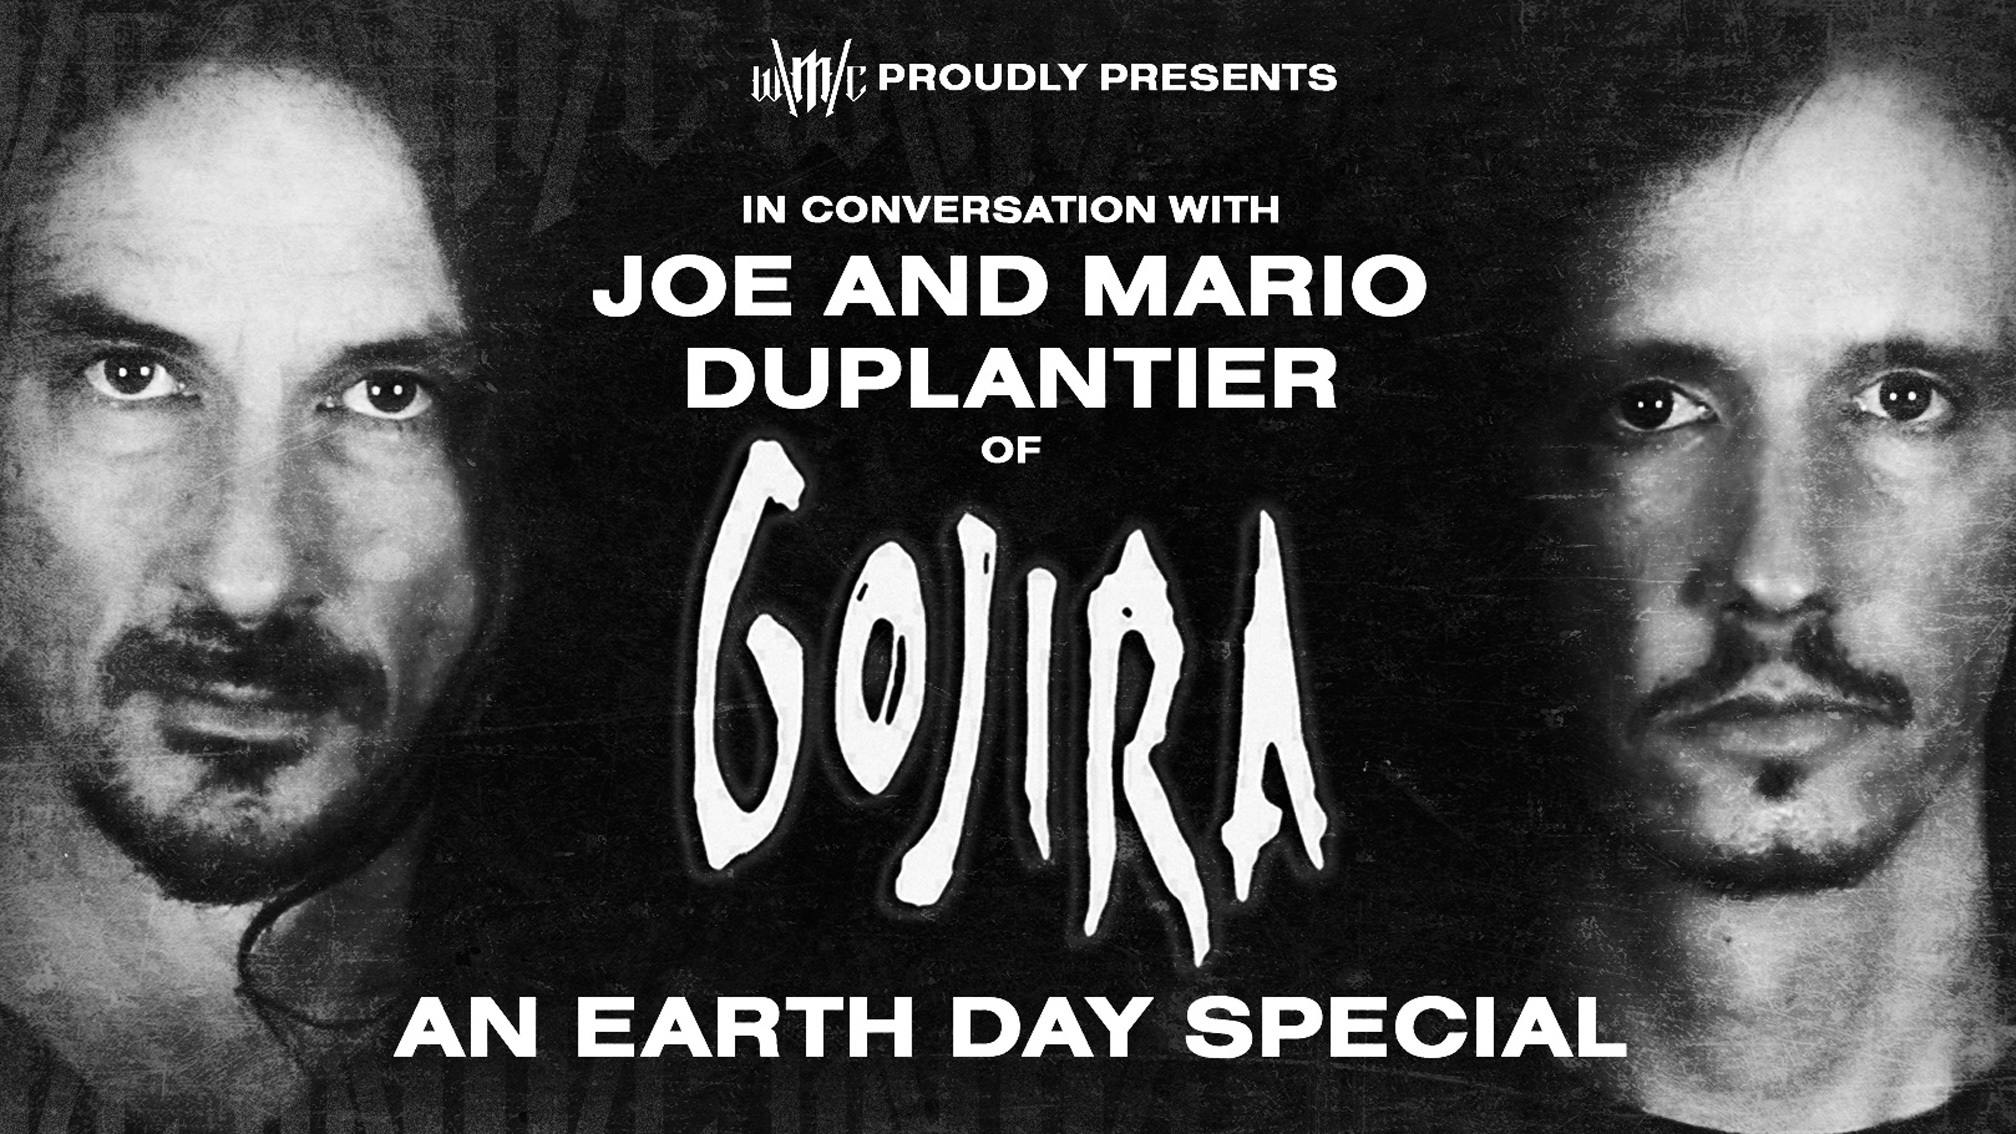 This evening: Gojira's Joe and Mario Duplantier guest on World Metal Congress' Earth Day special